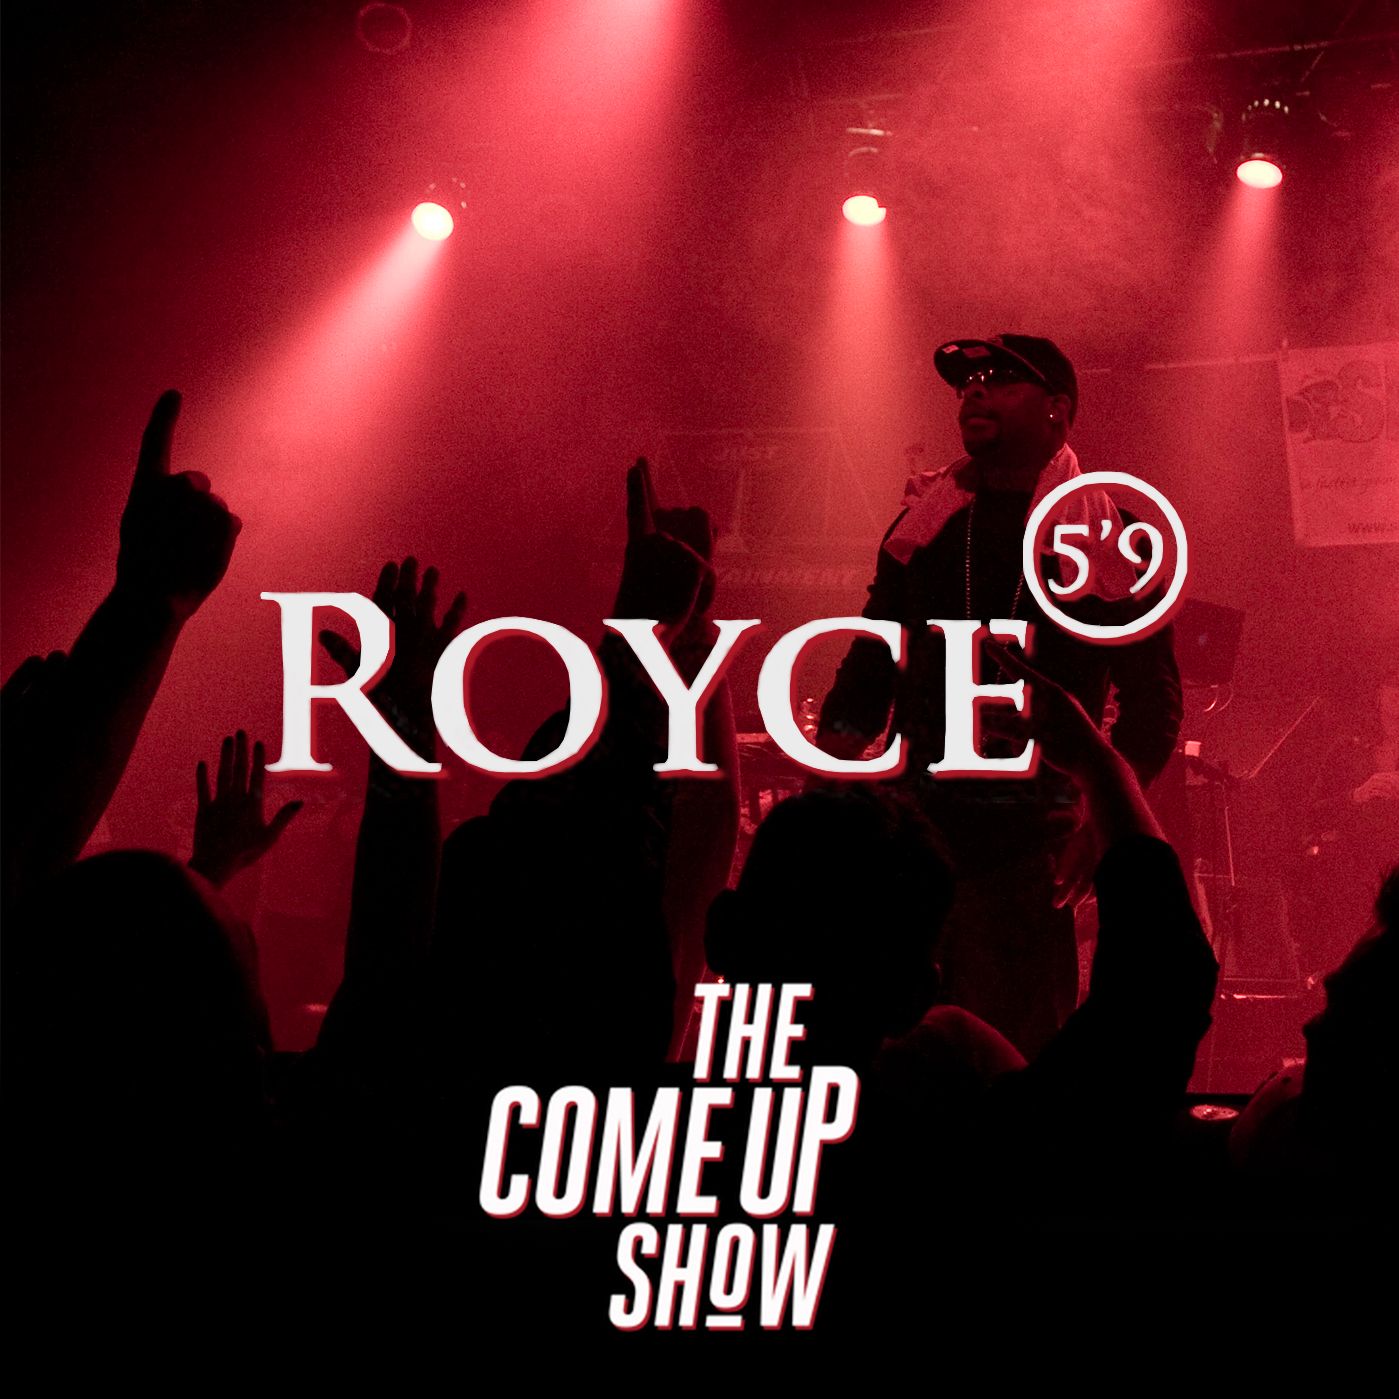 Thumbnail for "Royce da 5’9”: Everything boils down to consistency".